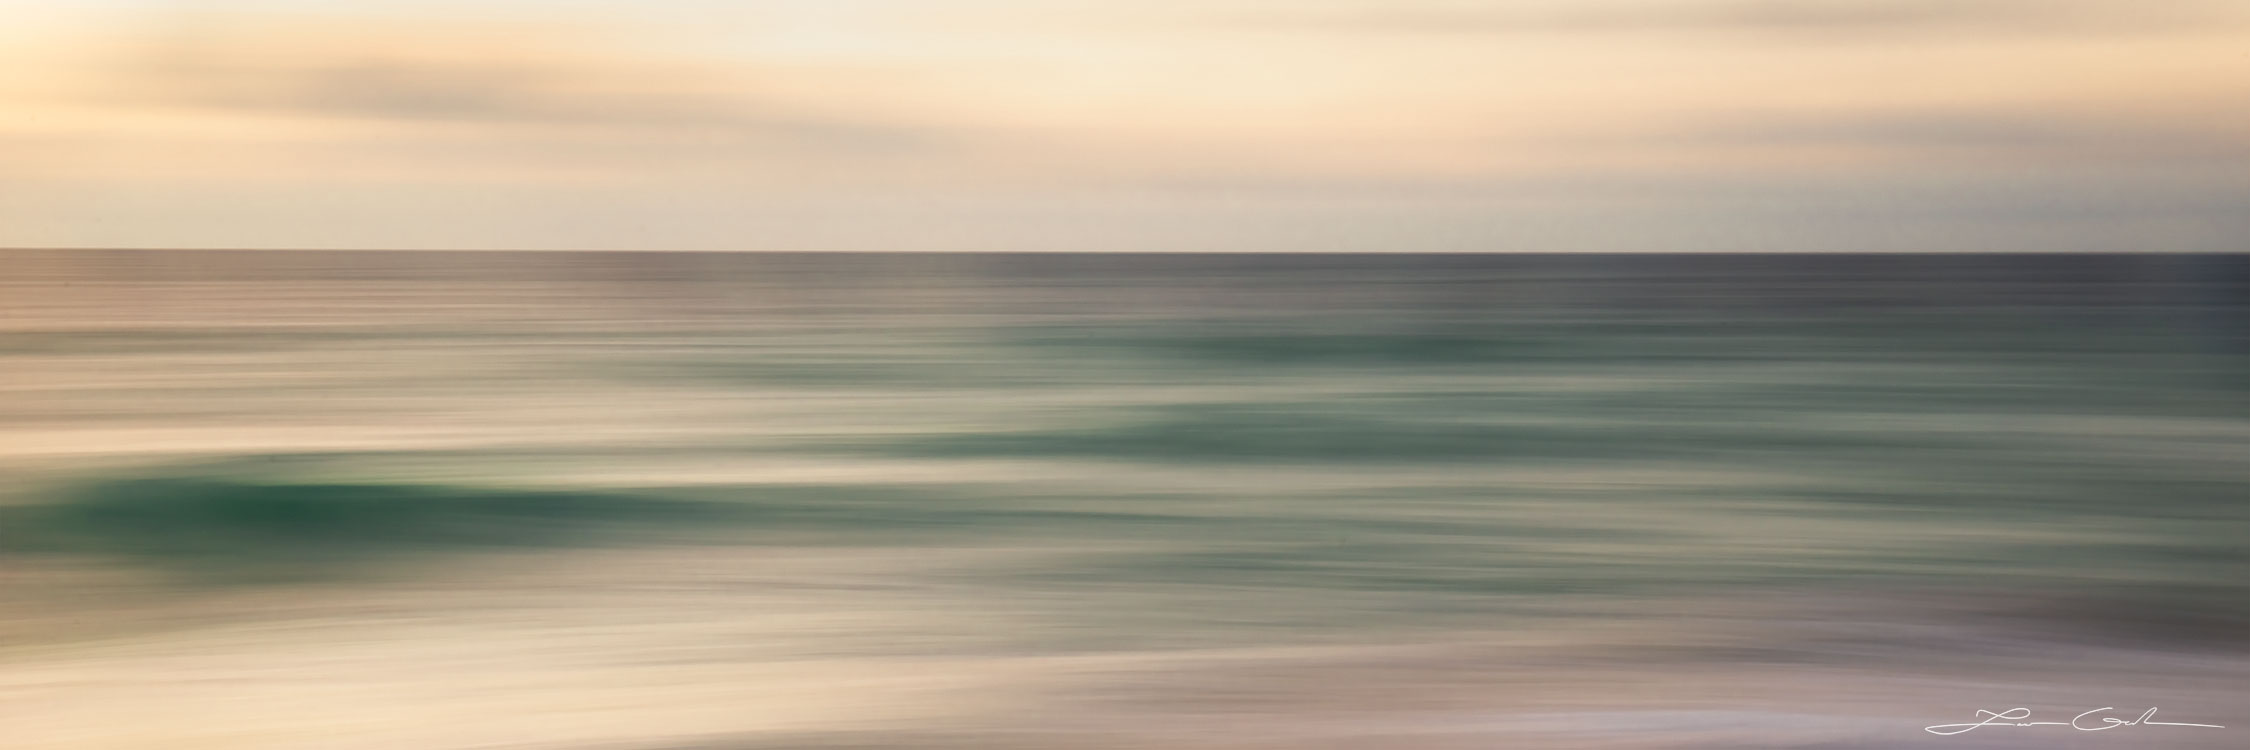 A panoramic ocean abstract photograph - Gintchin Fine Art